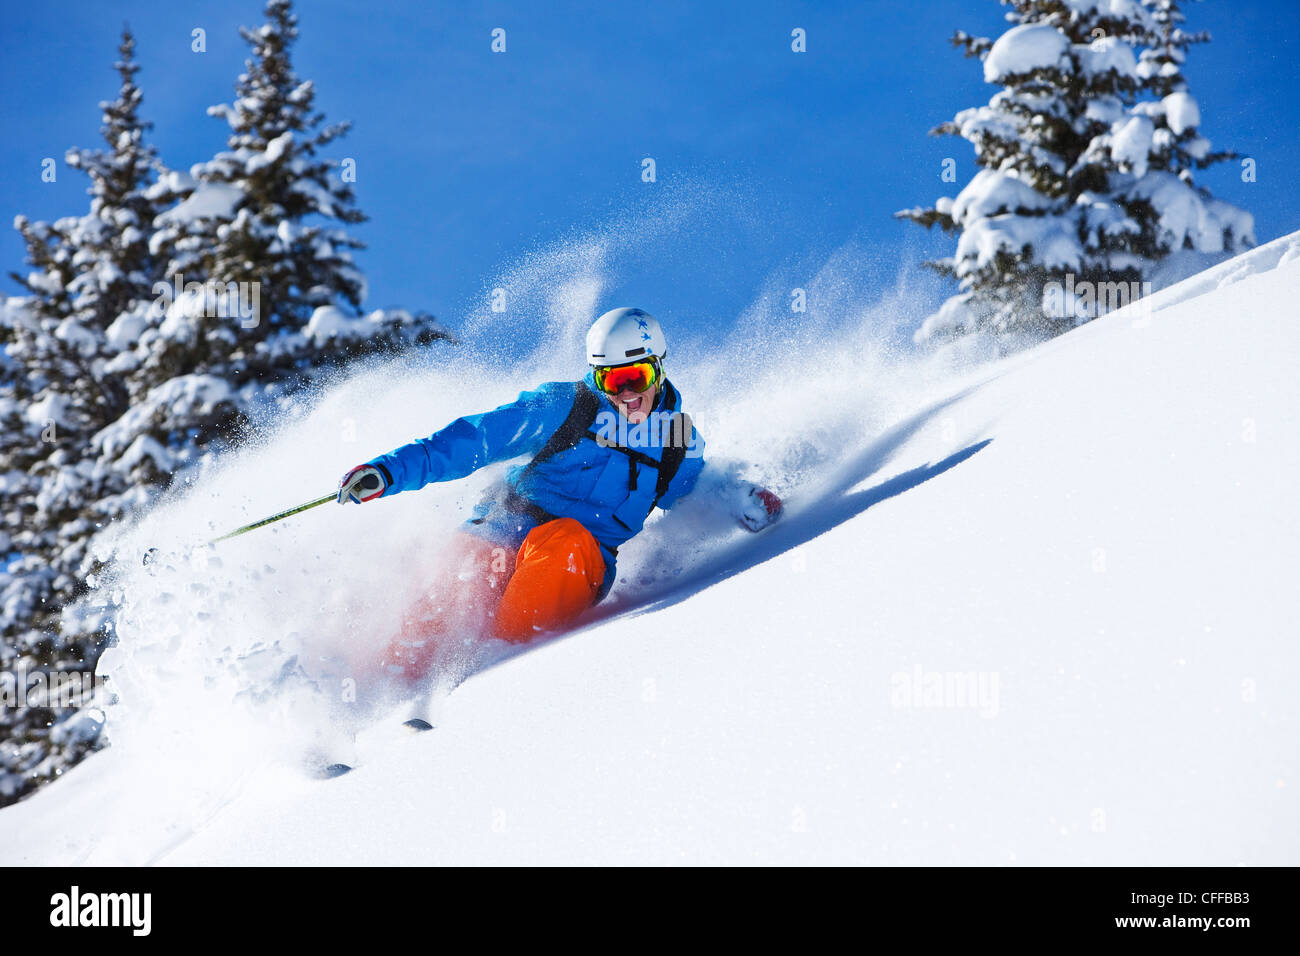 A athletic skier smiling rips fresh powder turns in the backcountry on a sunny day in Colorado. Stock Photo